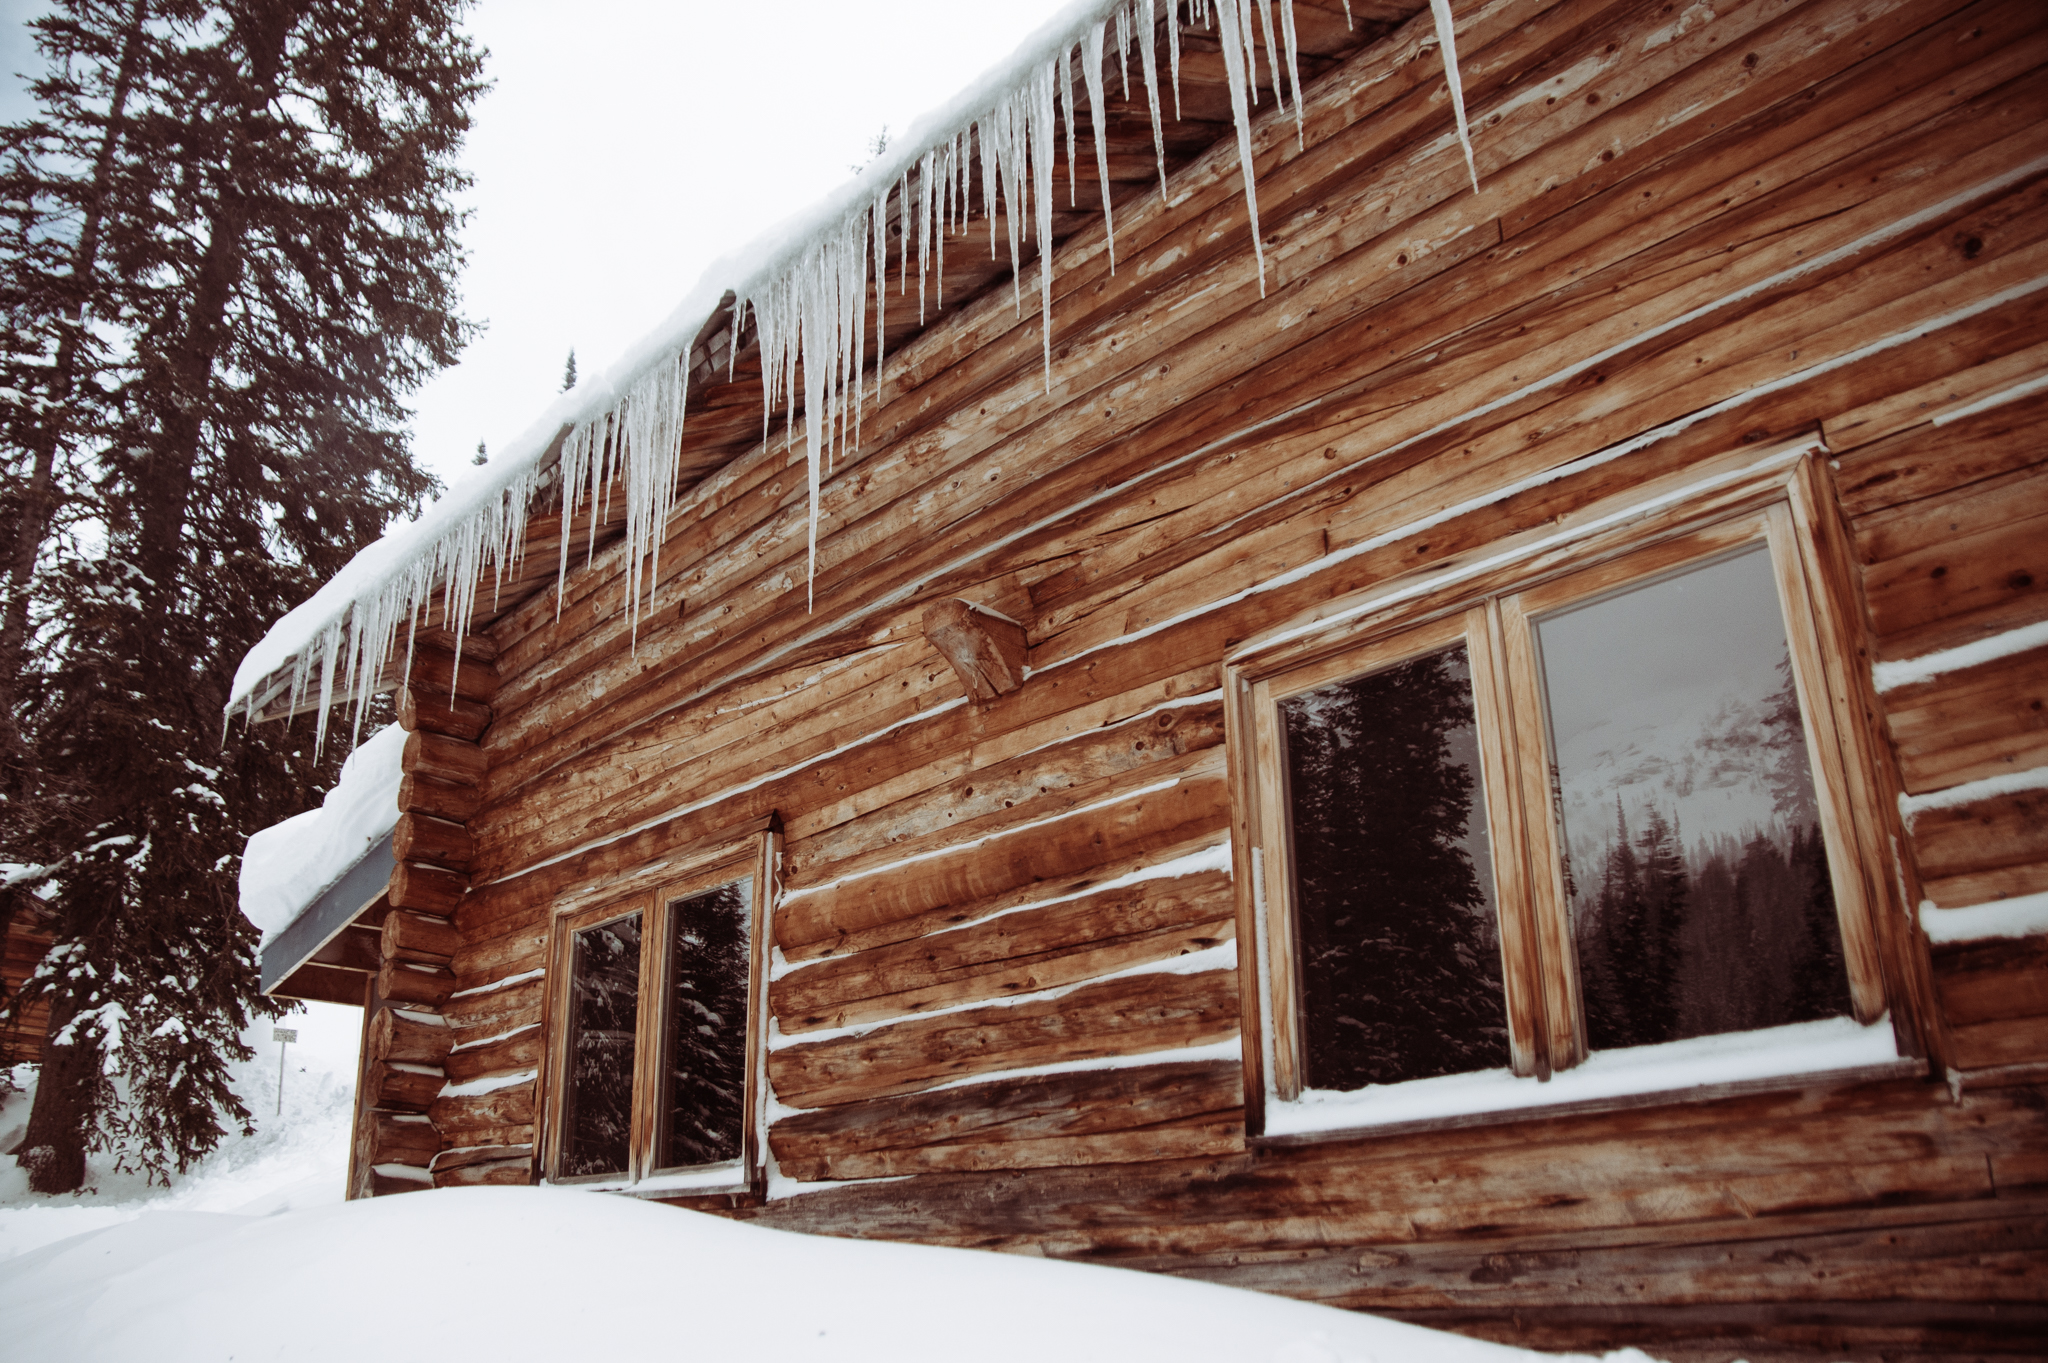 The Boulder Hut and its icicles.